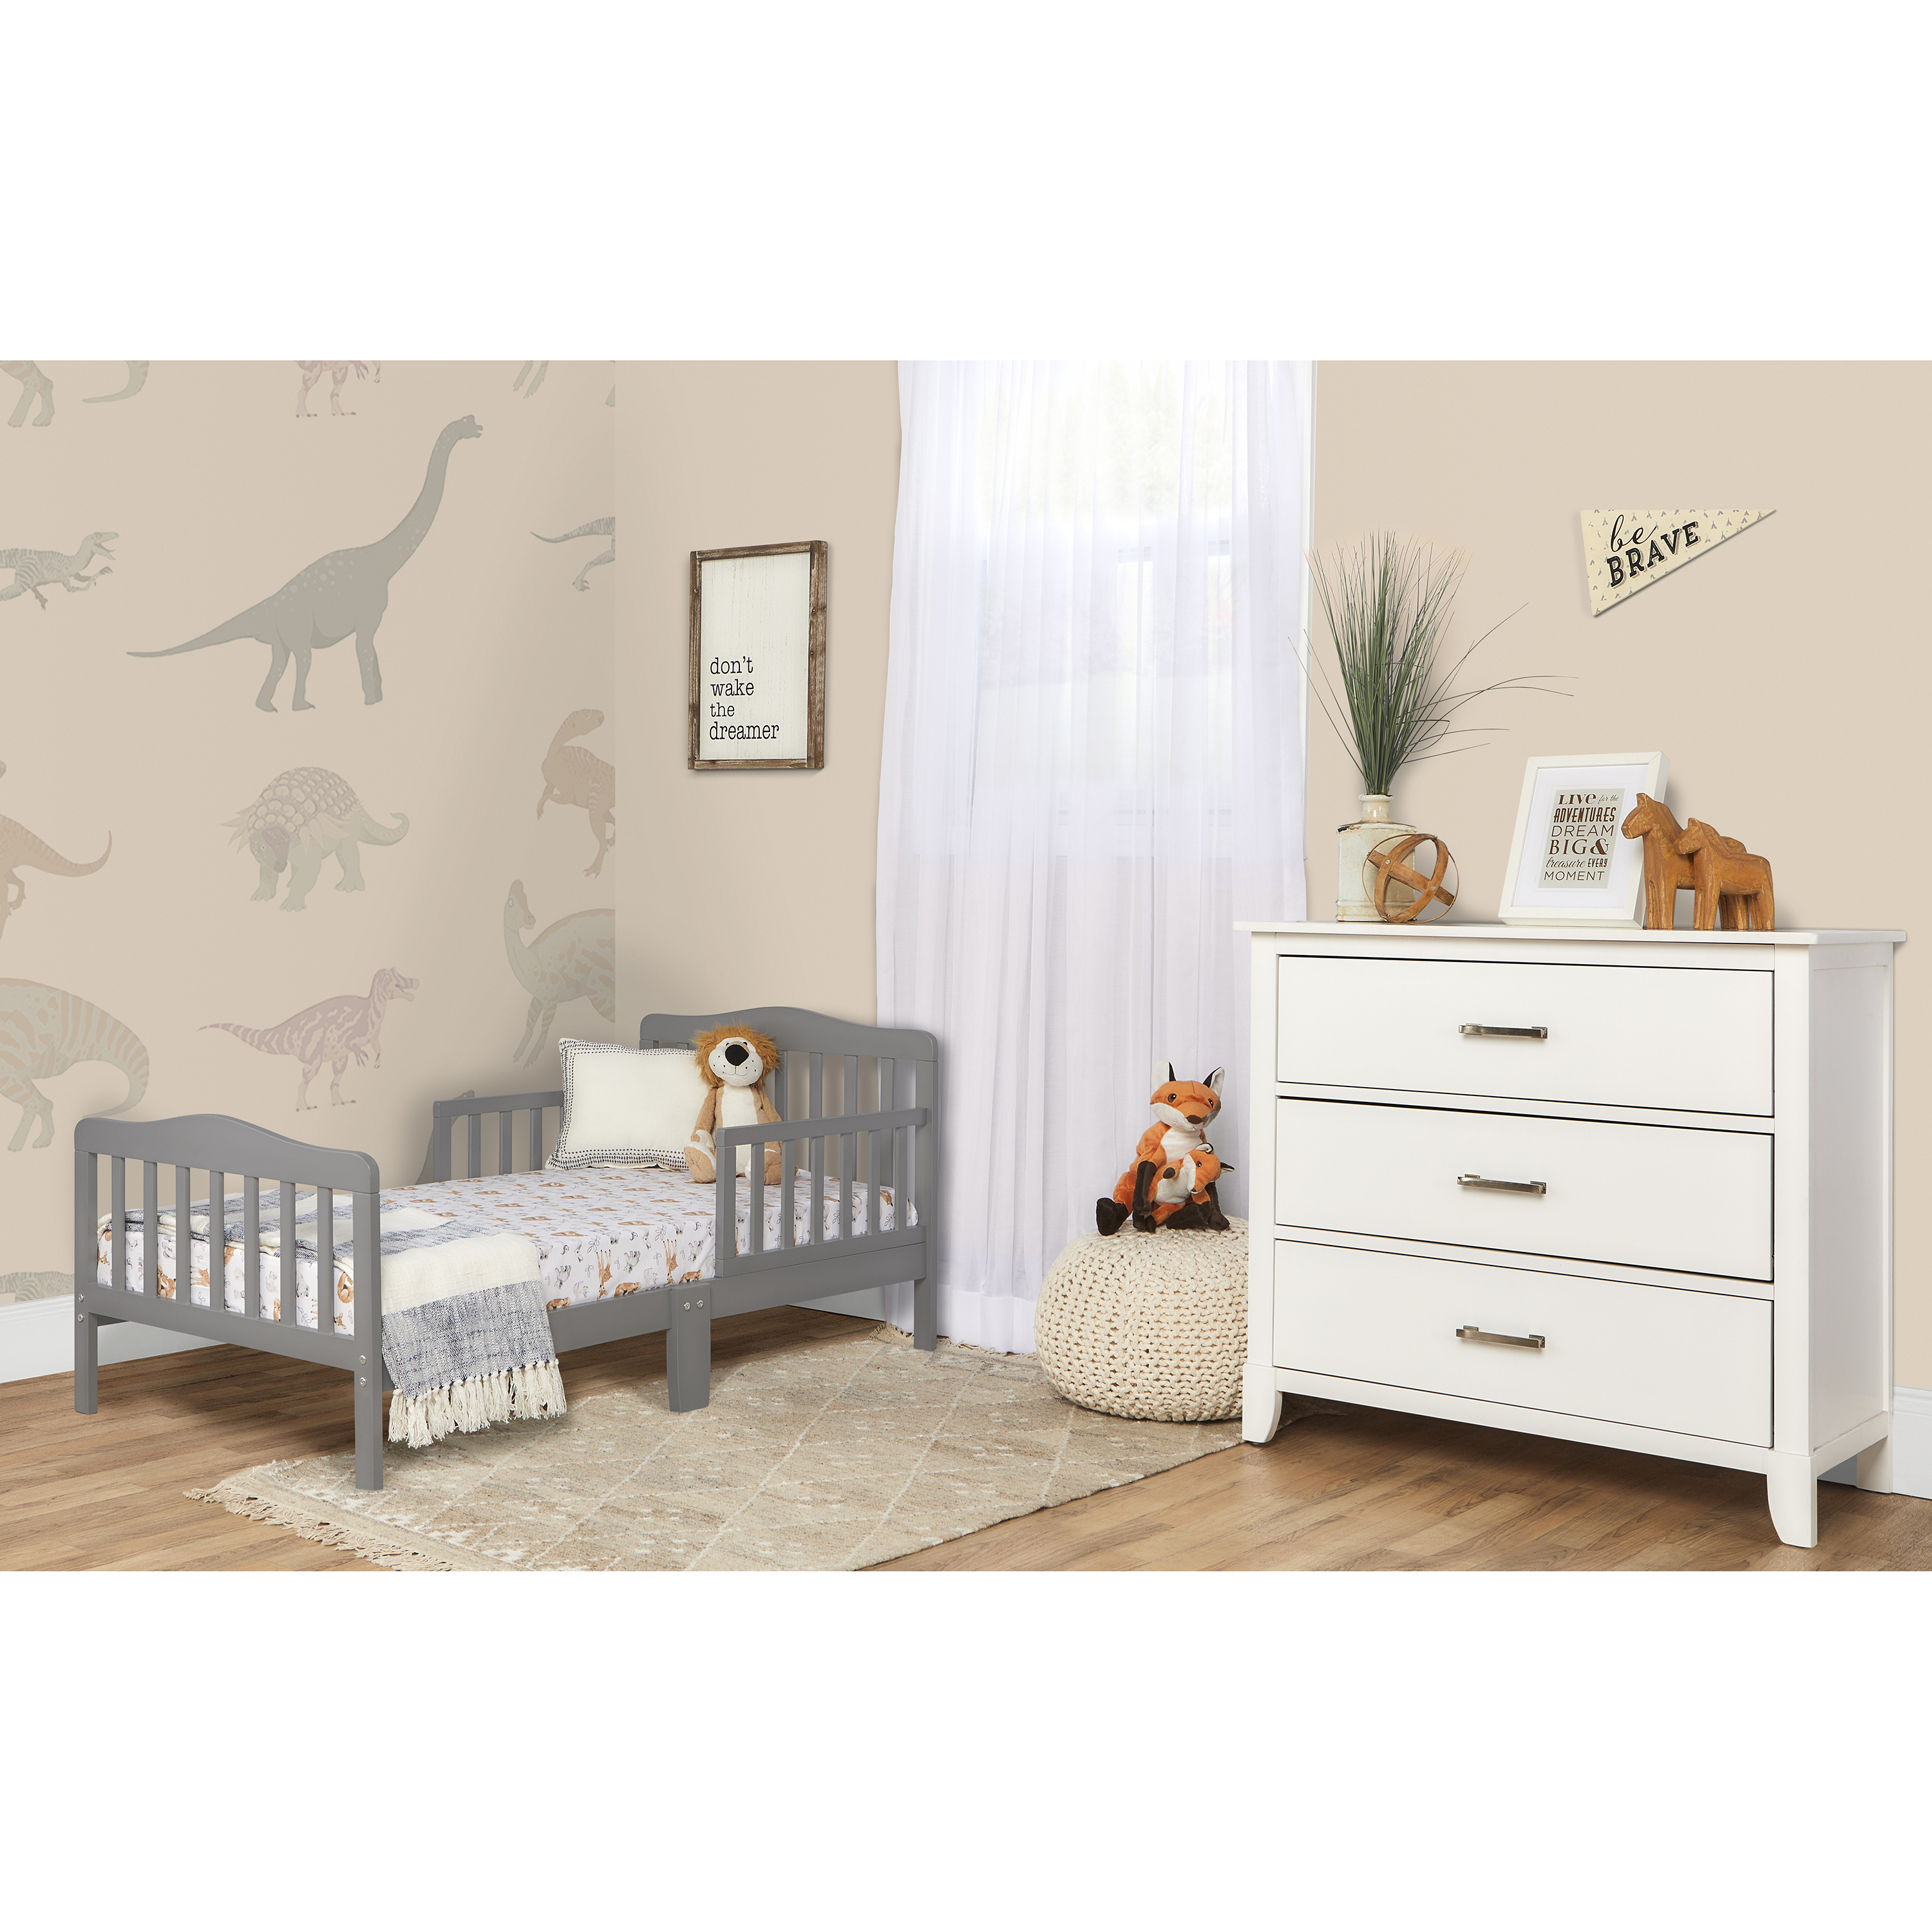 Dream On Me Classic Design Toddler Bed, Steel Grey - image 4 of 15